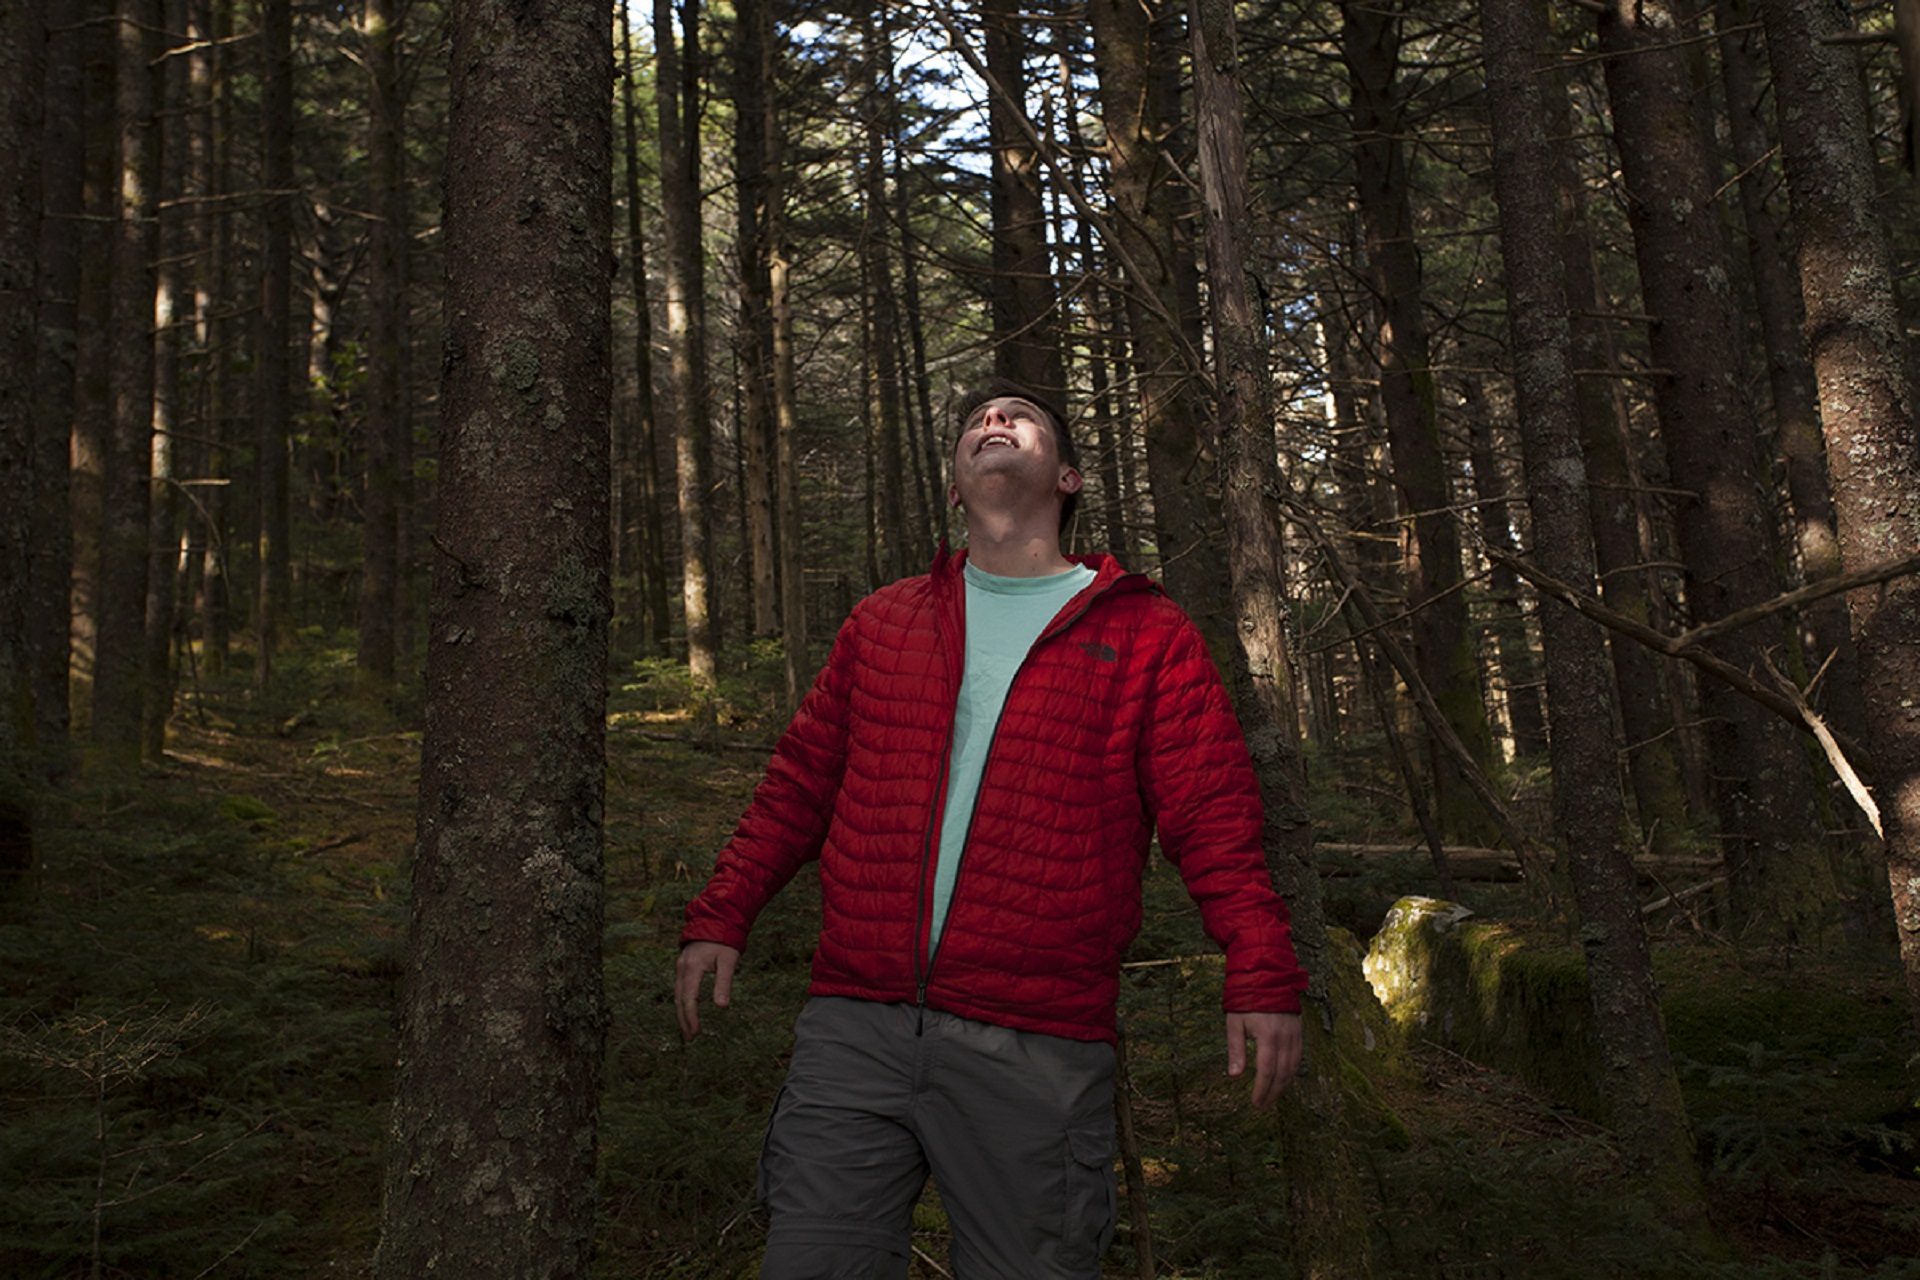 Scott Cory, who’s been studying Fraser firs for nearly a decade, in a fir forest on Roan Mountain, in Tennessee.